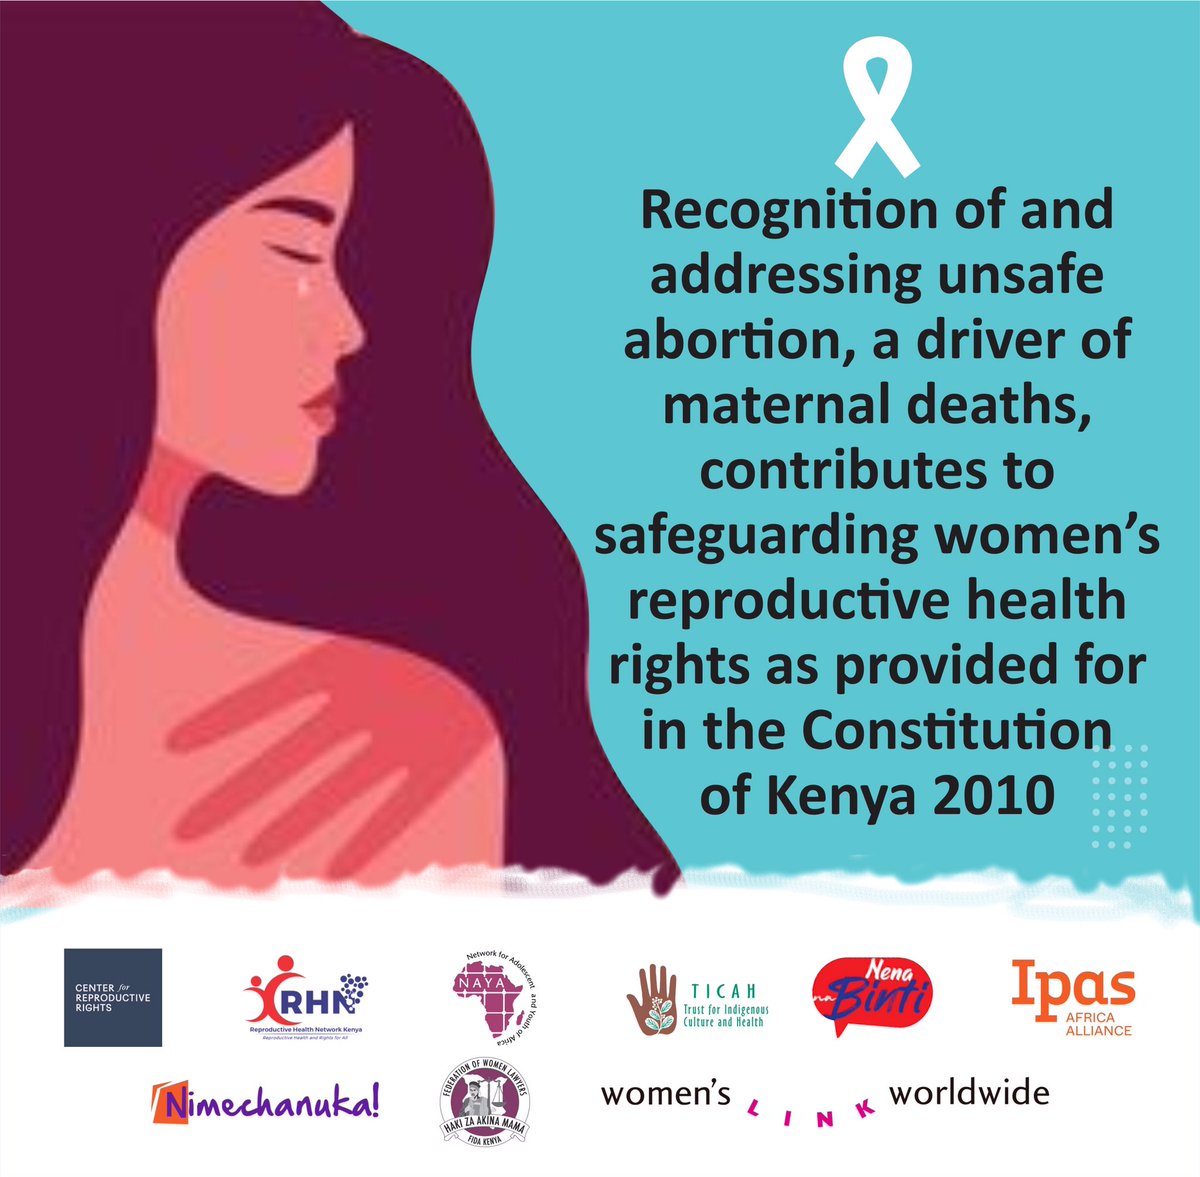 The burden of unsafe abortion lies not only with women and families, but also with public health system. We must ensure the full implementation of the 2010 constitution in safeguarding the right to highest attainable standards of health including abortion #DefendHerRightsKE